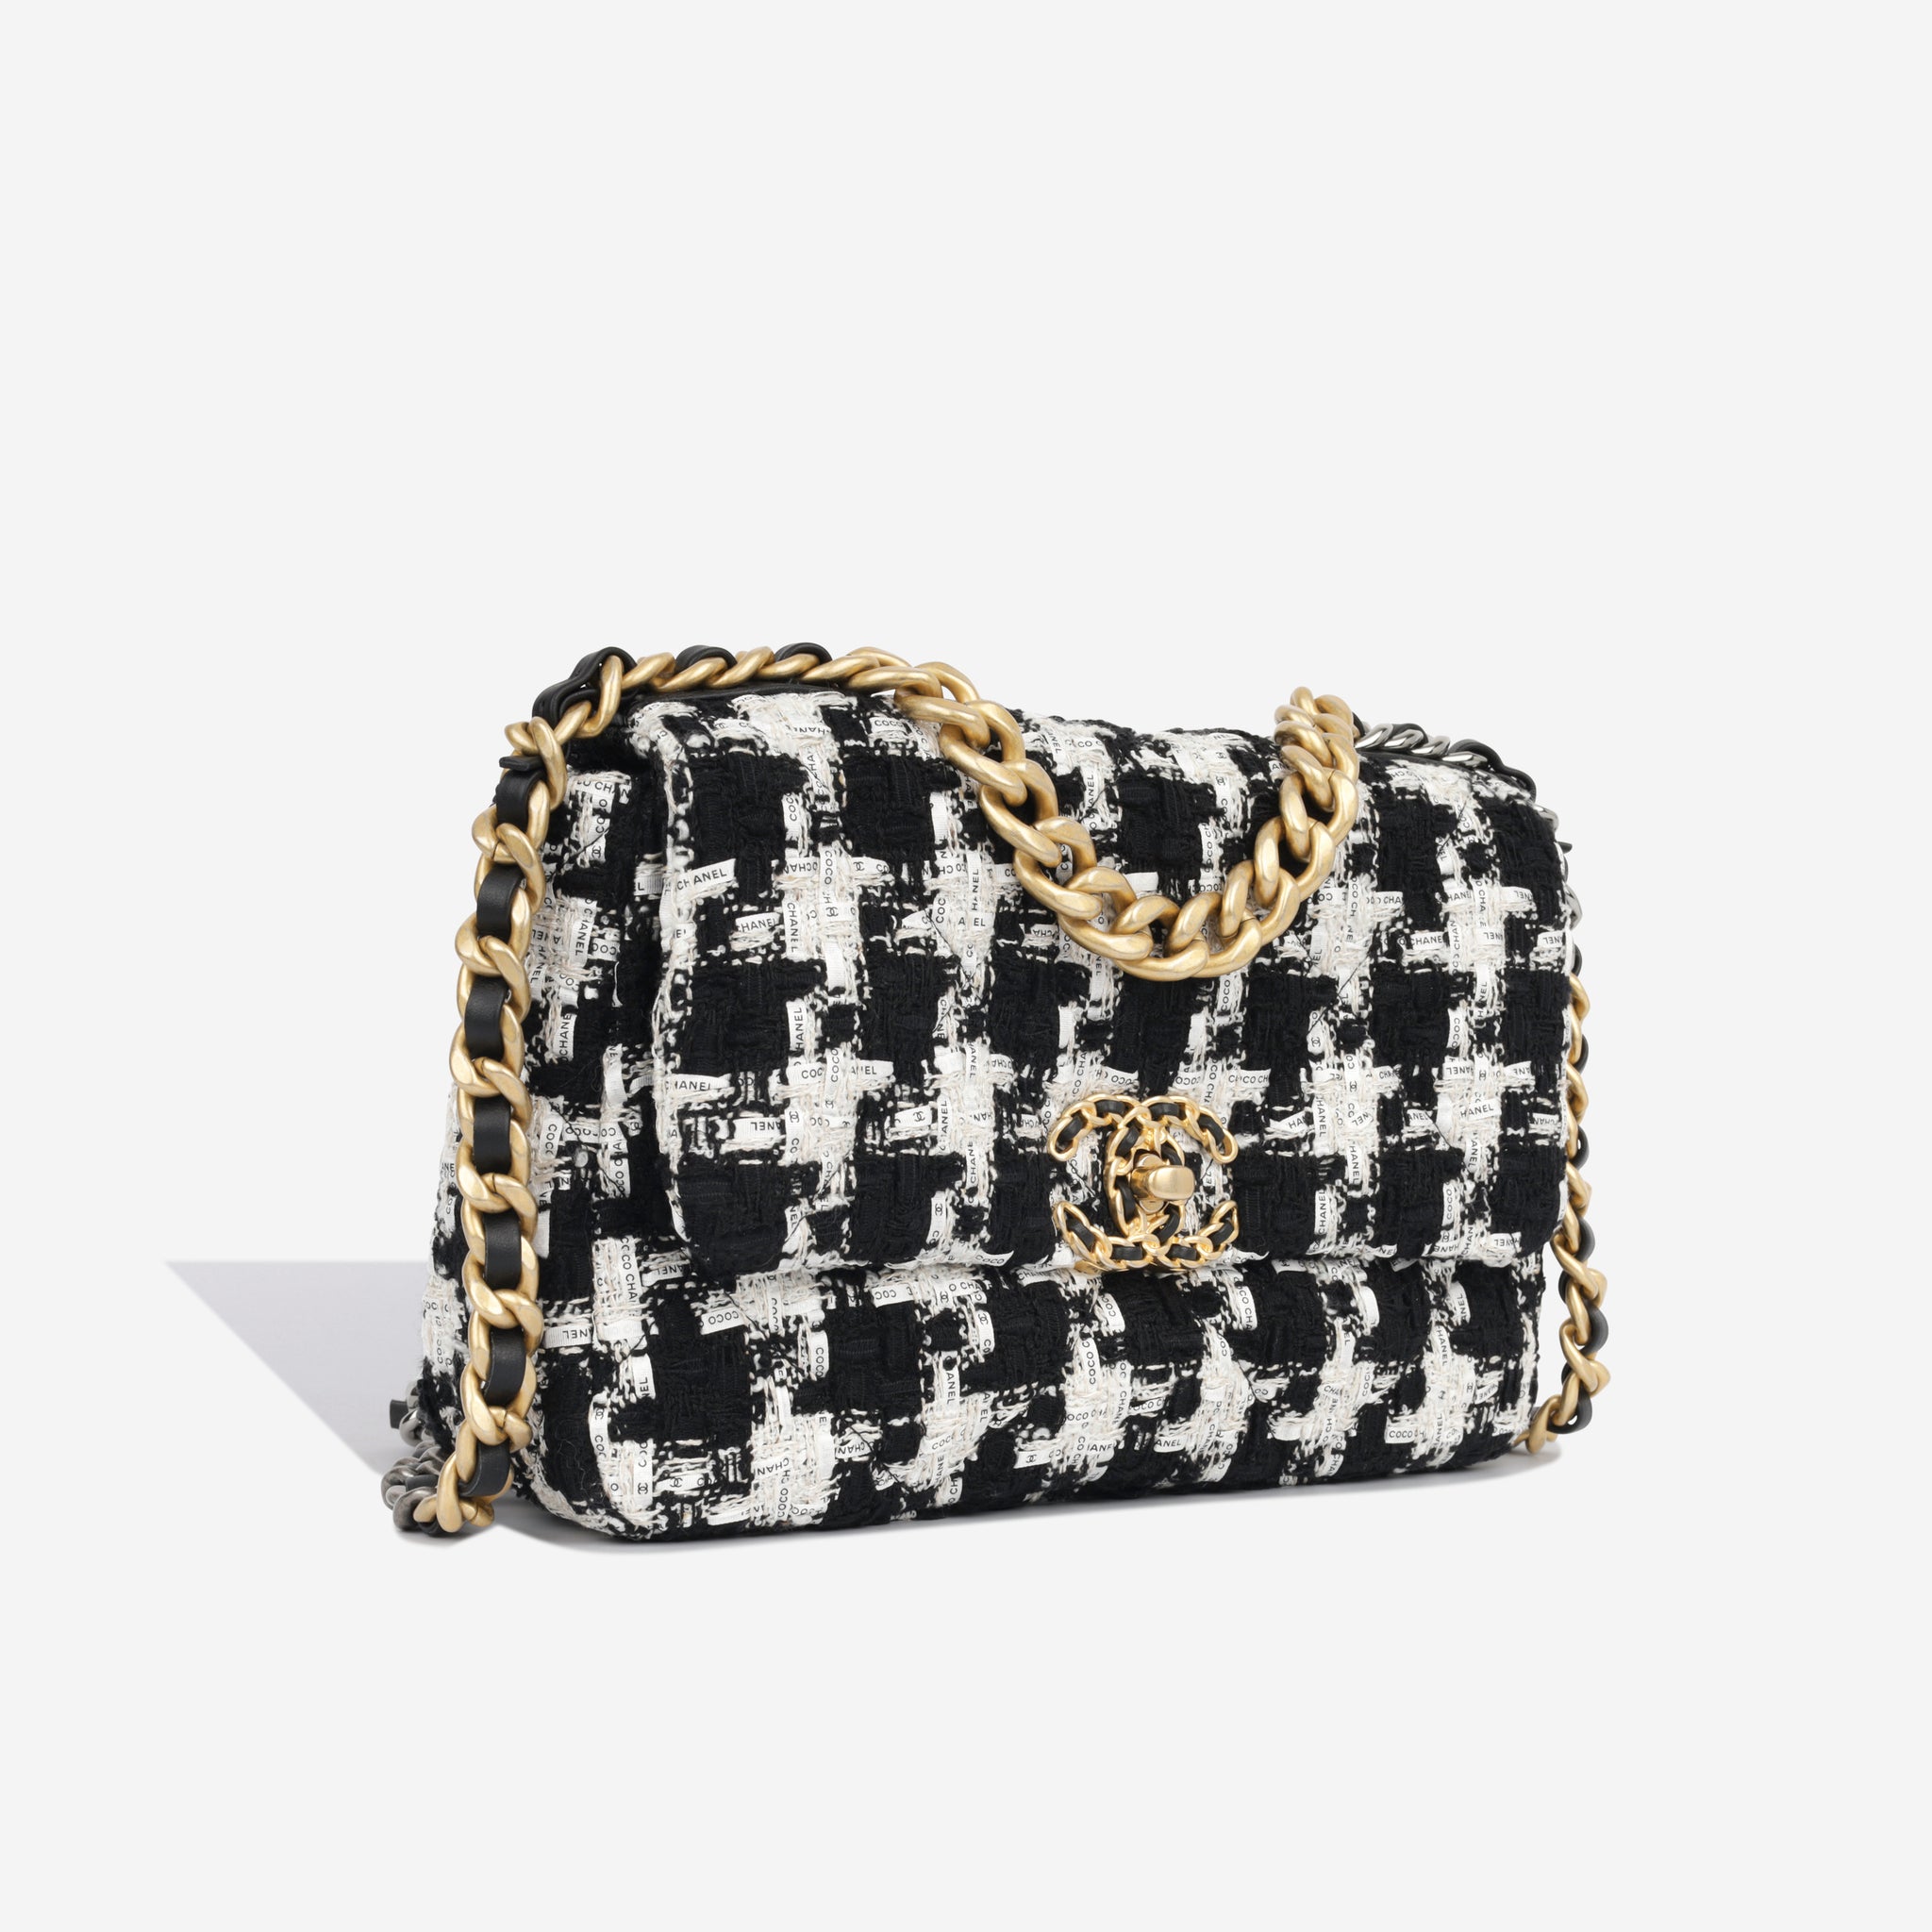 Chanel What Goes Around Comes Around Tweed 19 Bag